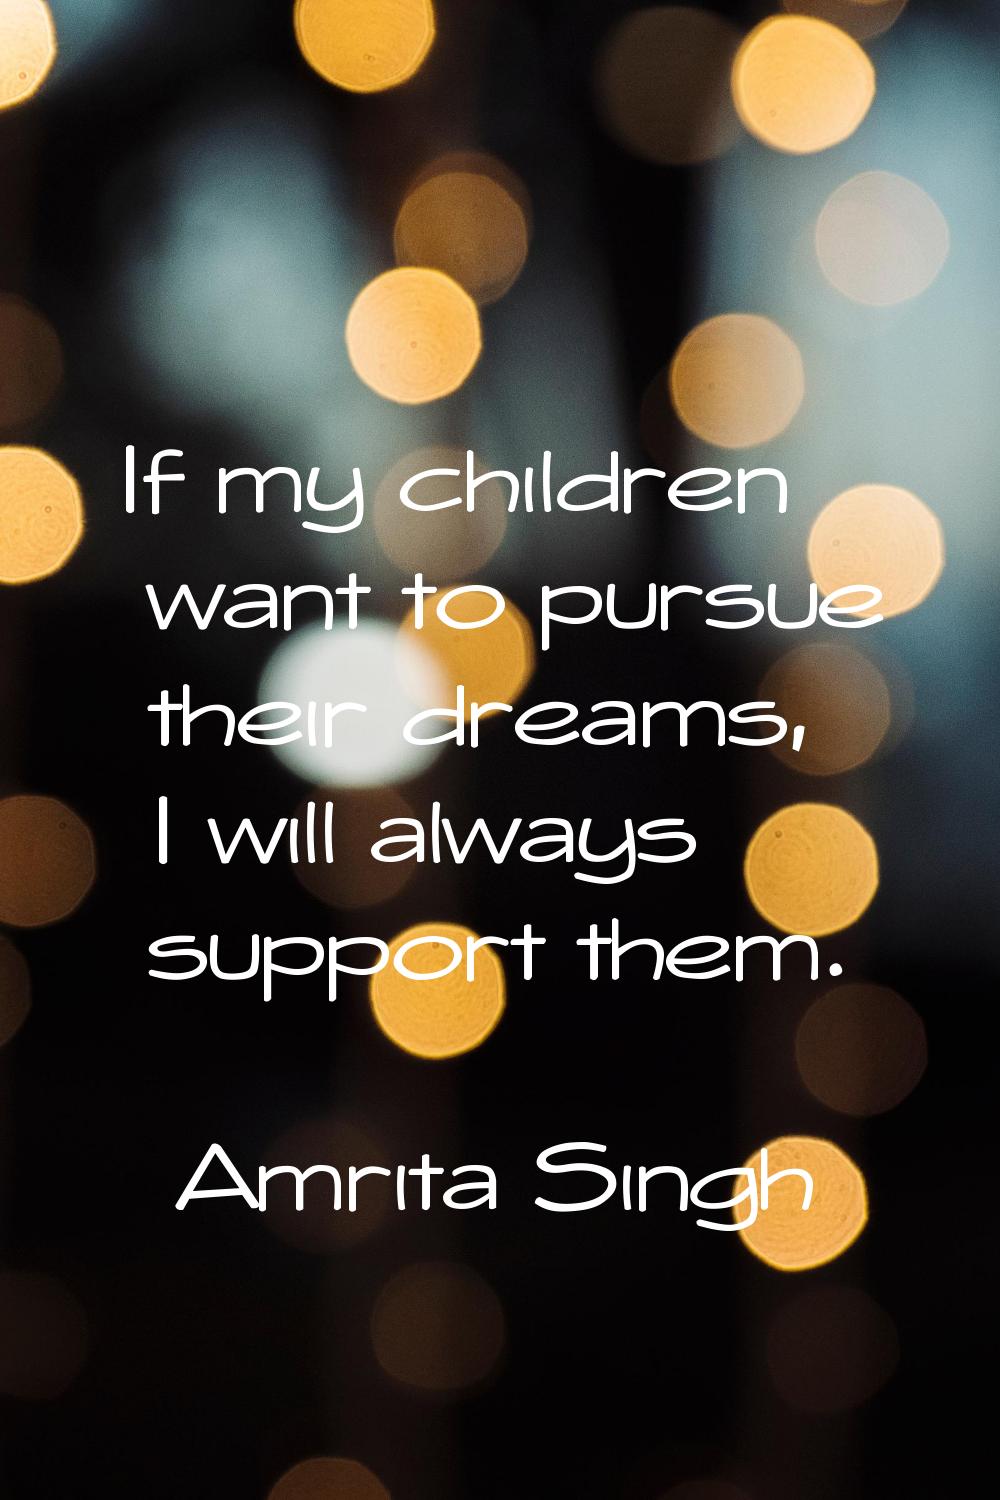 If my children want to pursue their dreams, I will always support them.